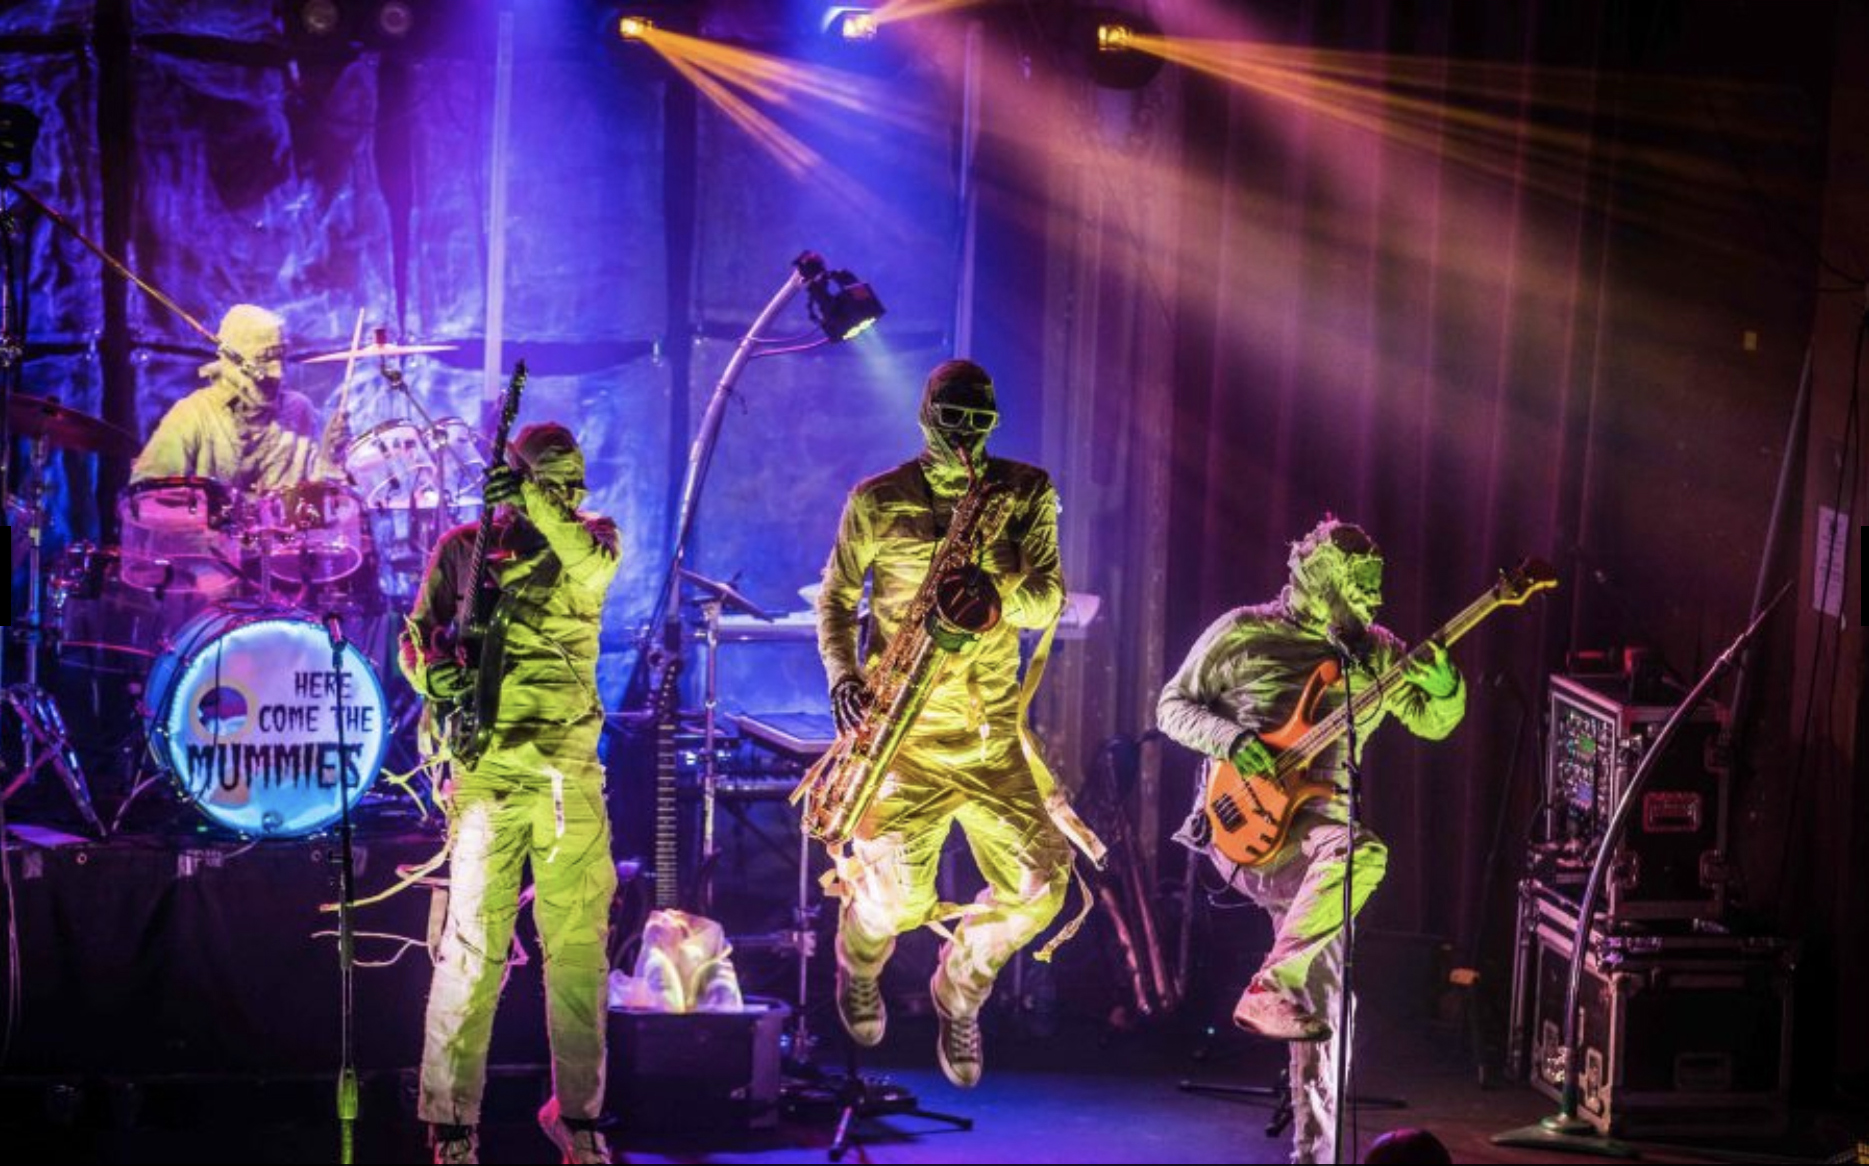 HERE COME THE MUMMIES tickets, presale info and more Box Office Hero